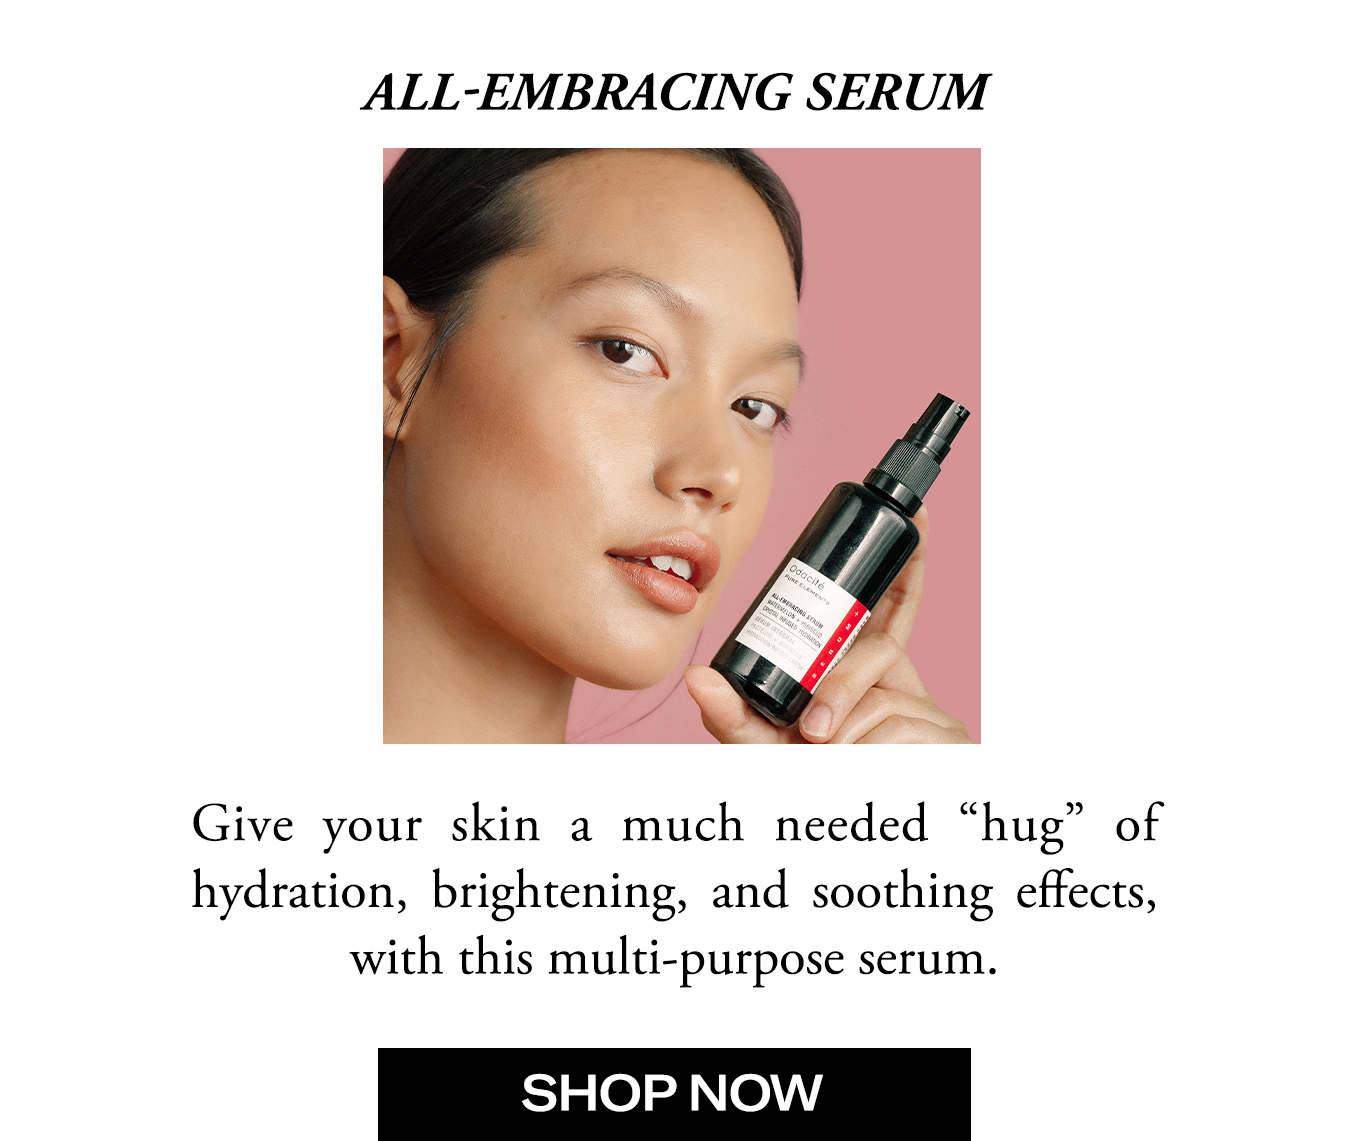 Shop Our All-Embracing Serum